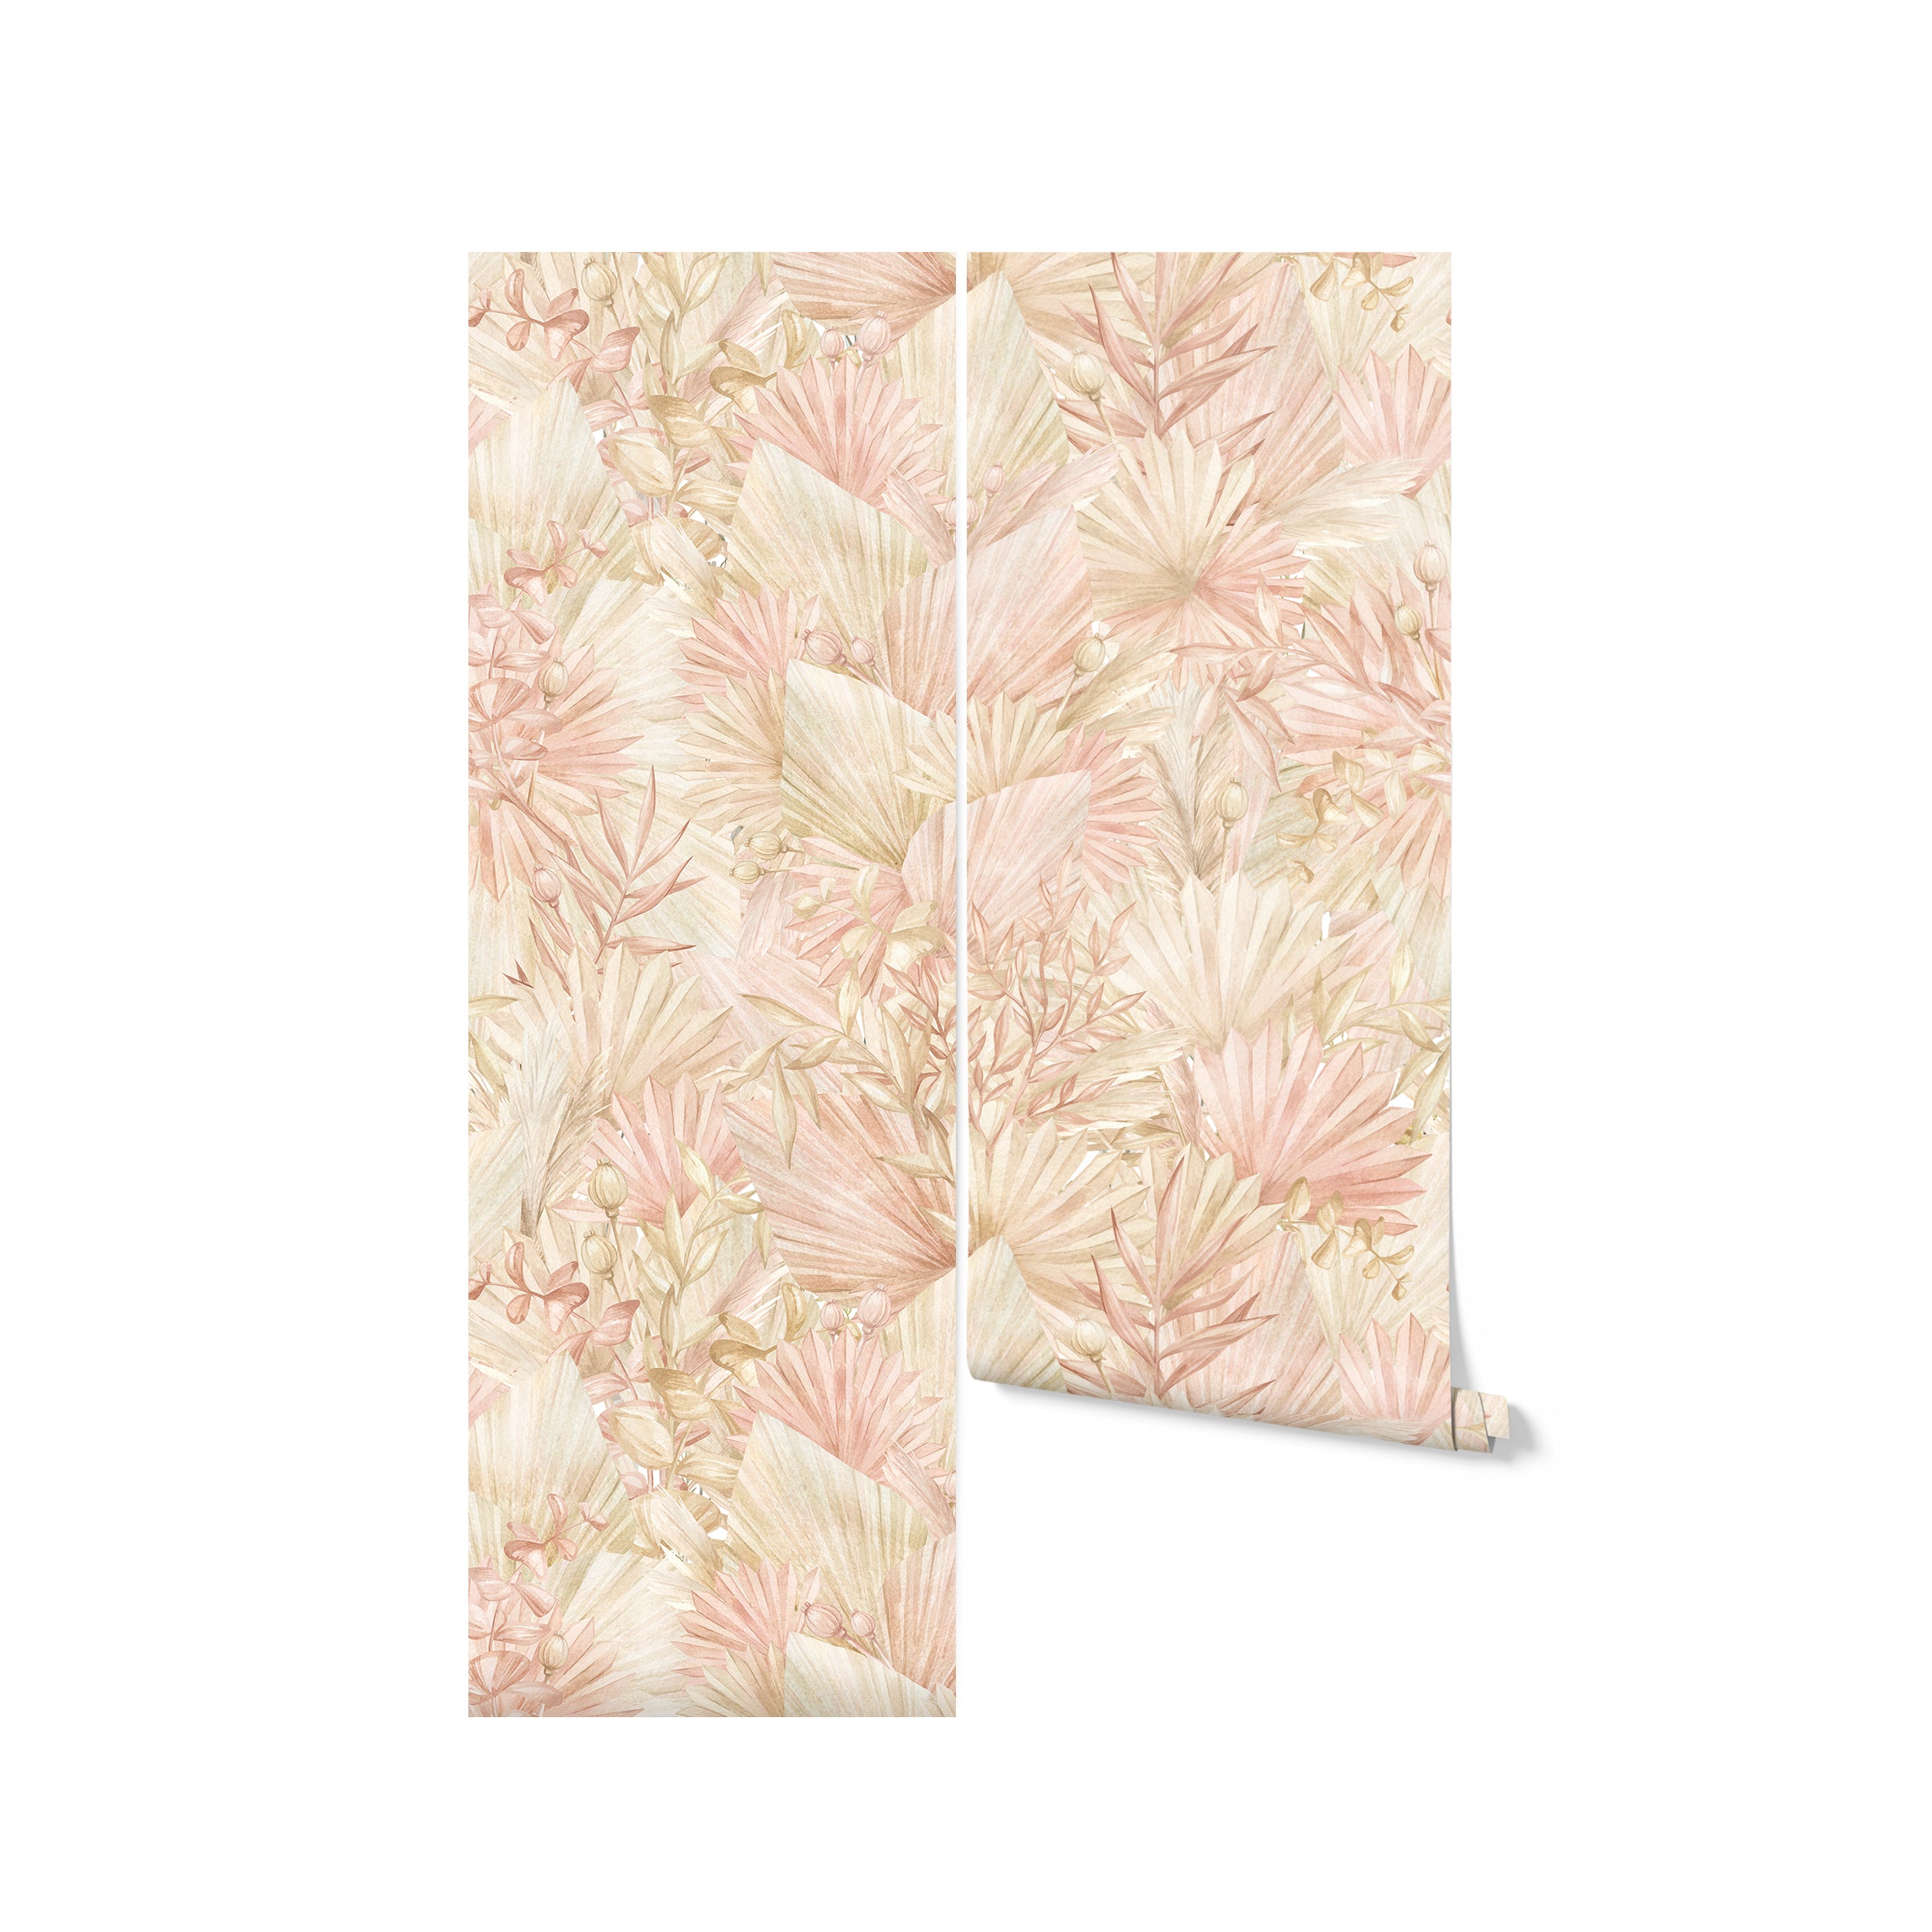 A roll of Floral Tropical Wallpaper, showcasing its detailed pattern of tropical leaves and plants in soft pastel tones, ready to enhance any room with a touch of natural elegance and warmth.